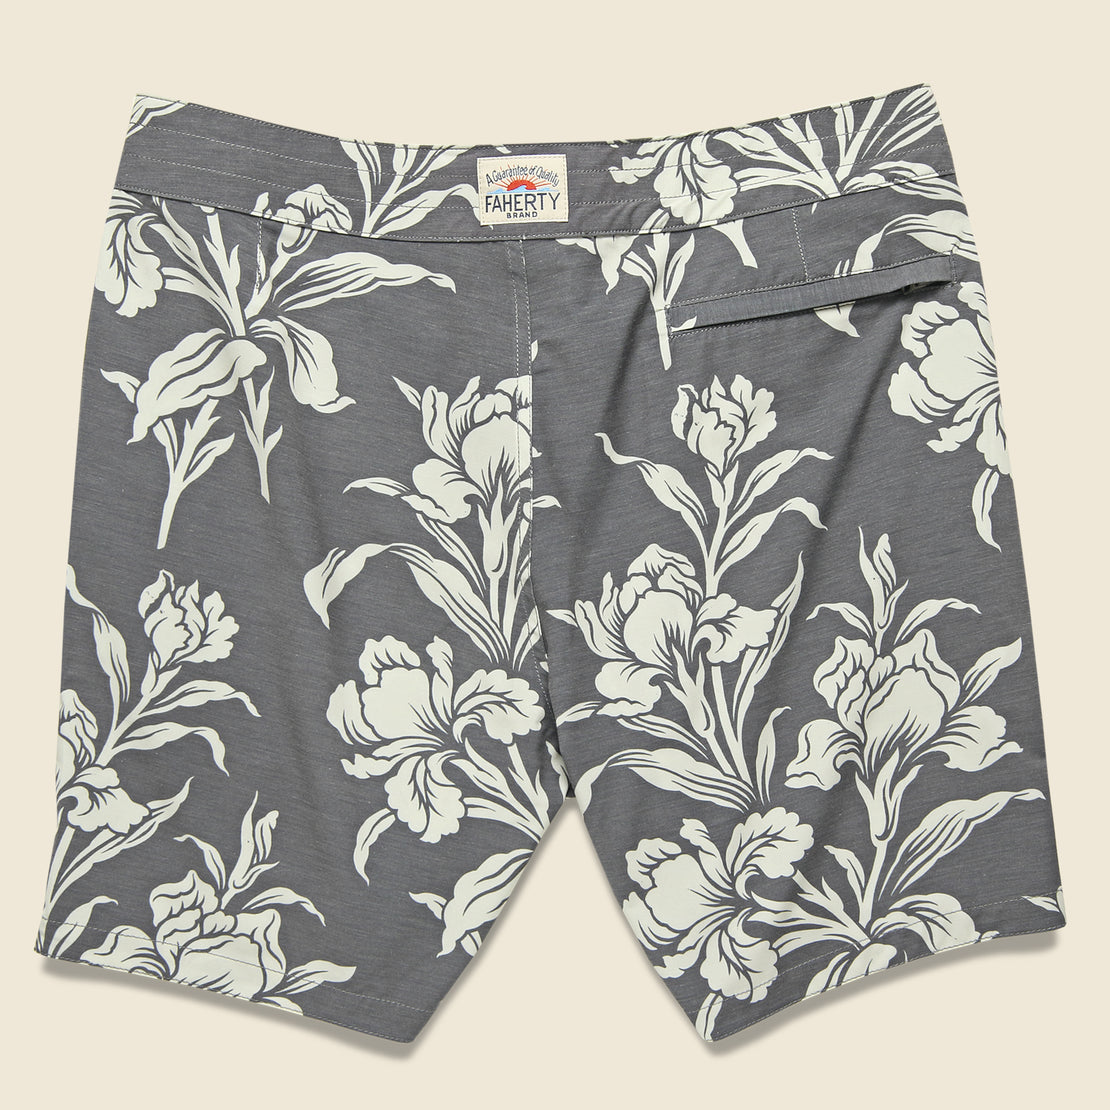 Classic 7" Boardshort - Black Floral - Faherty - STAG Provisions - Shorts - Swim